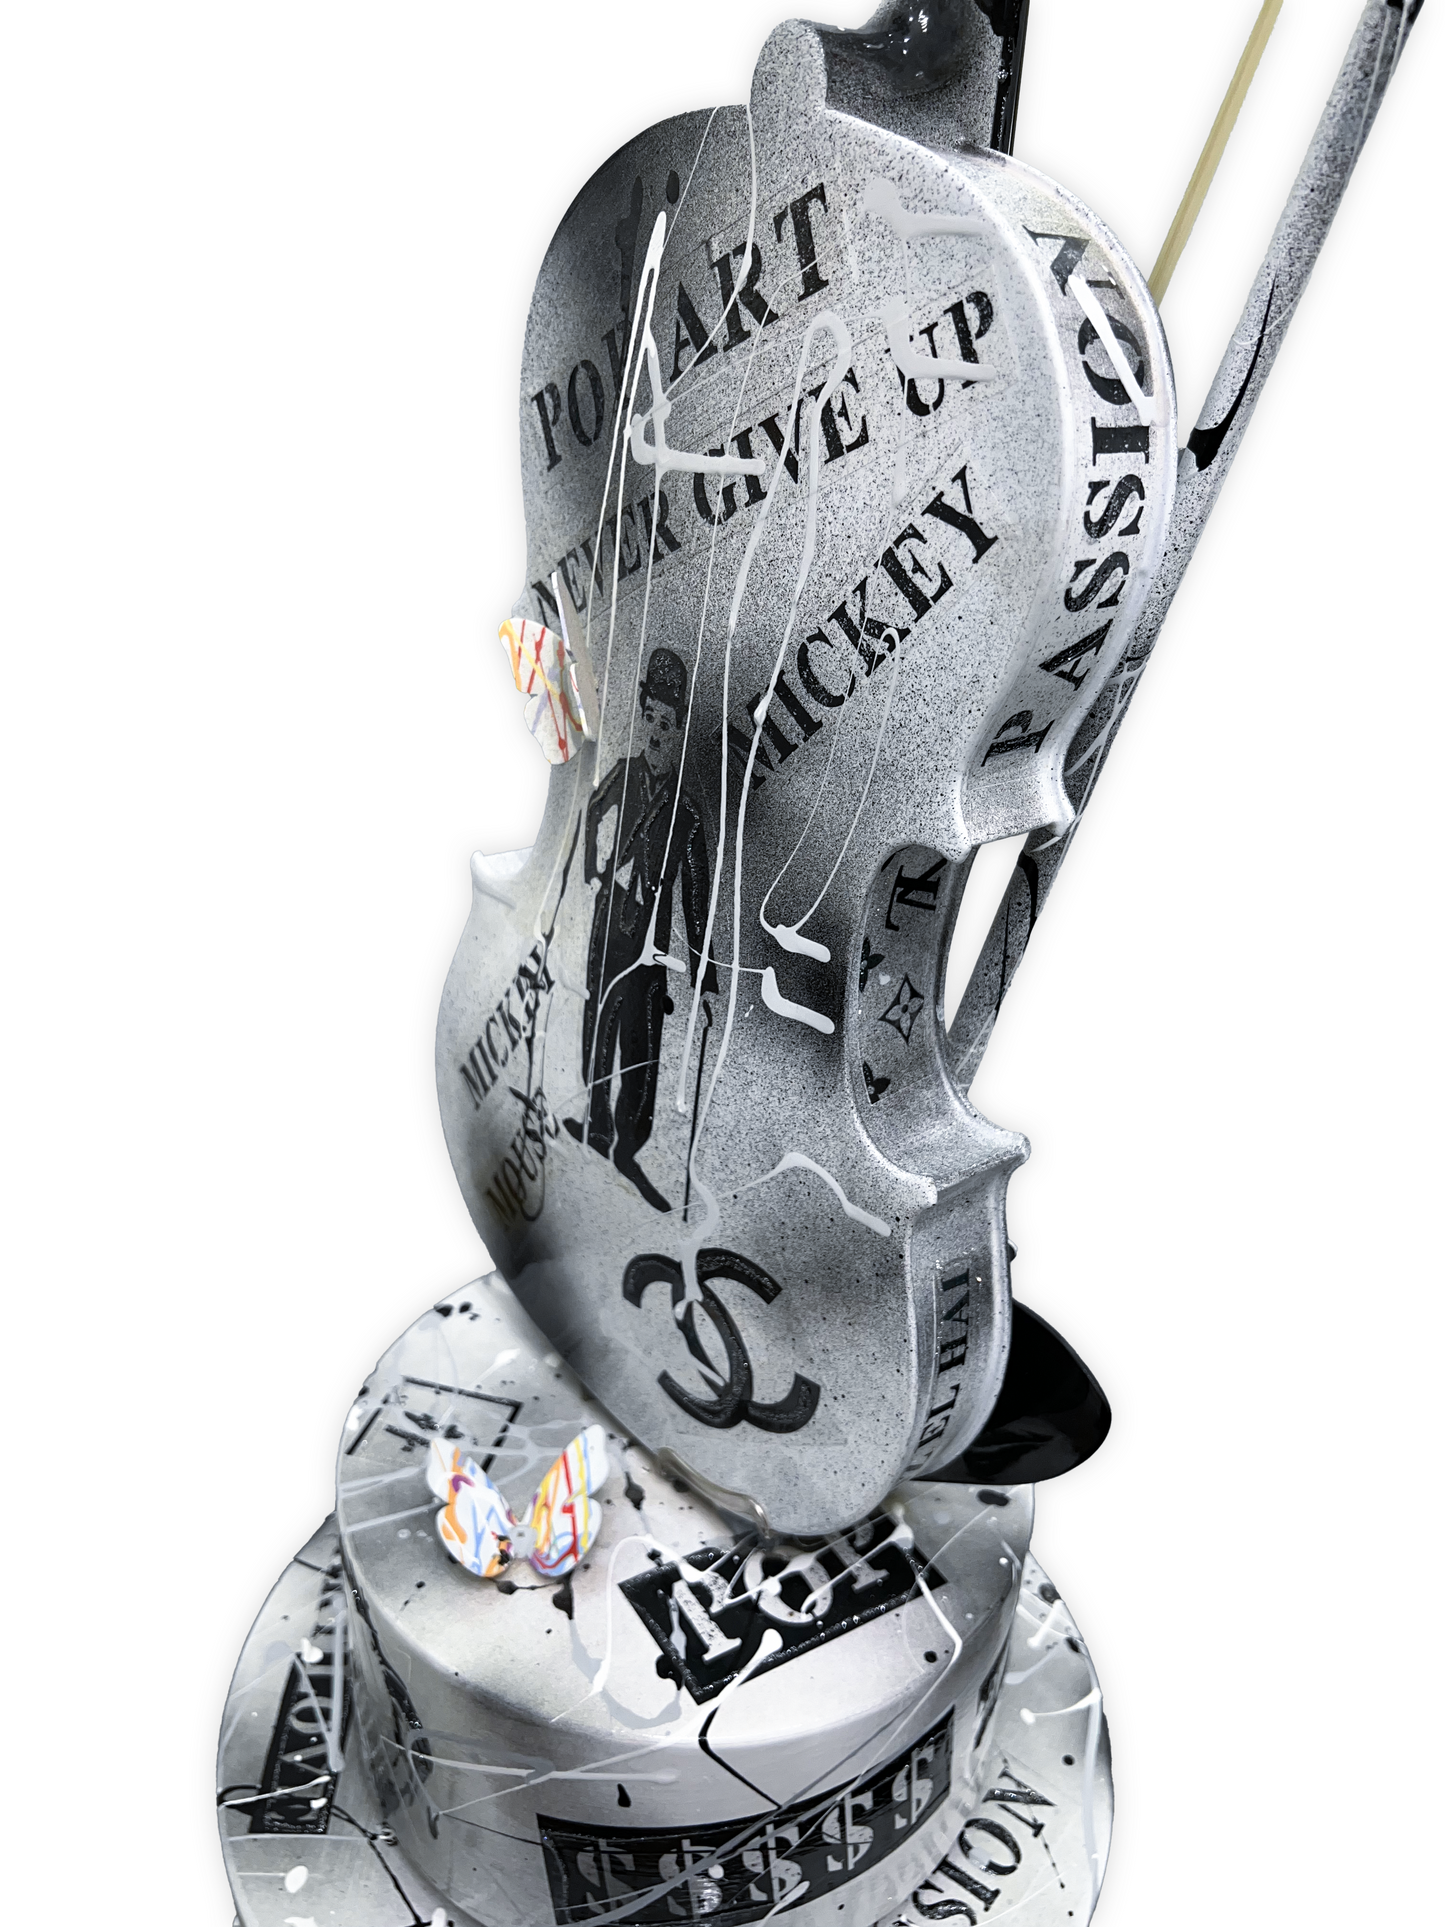 Side view of the Black & White Pop Art Violin Sculpture